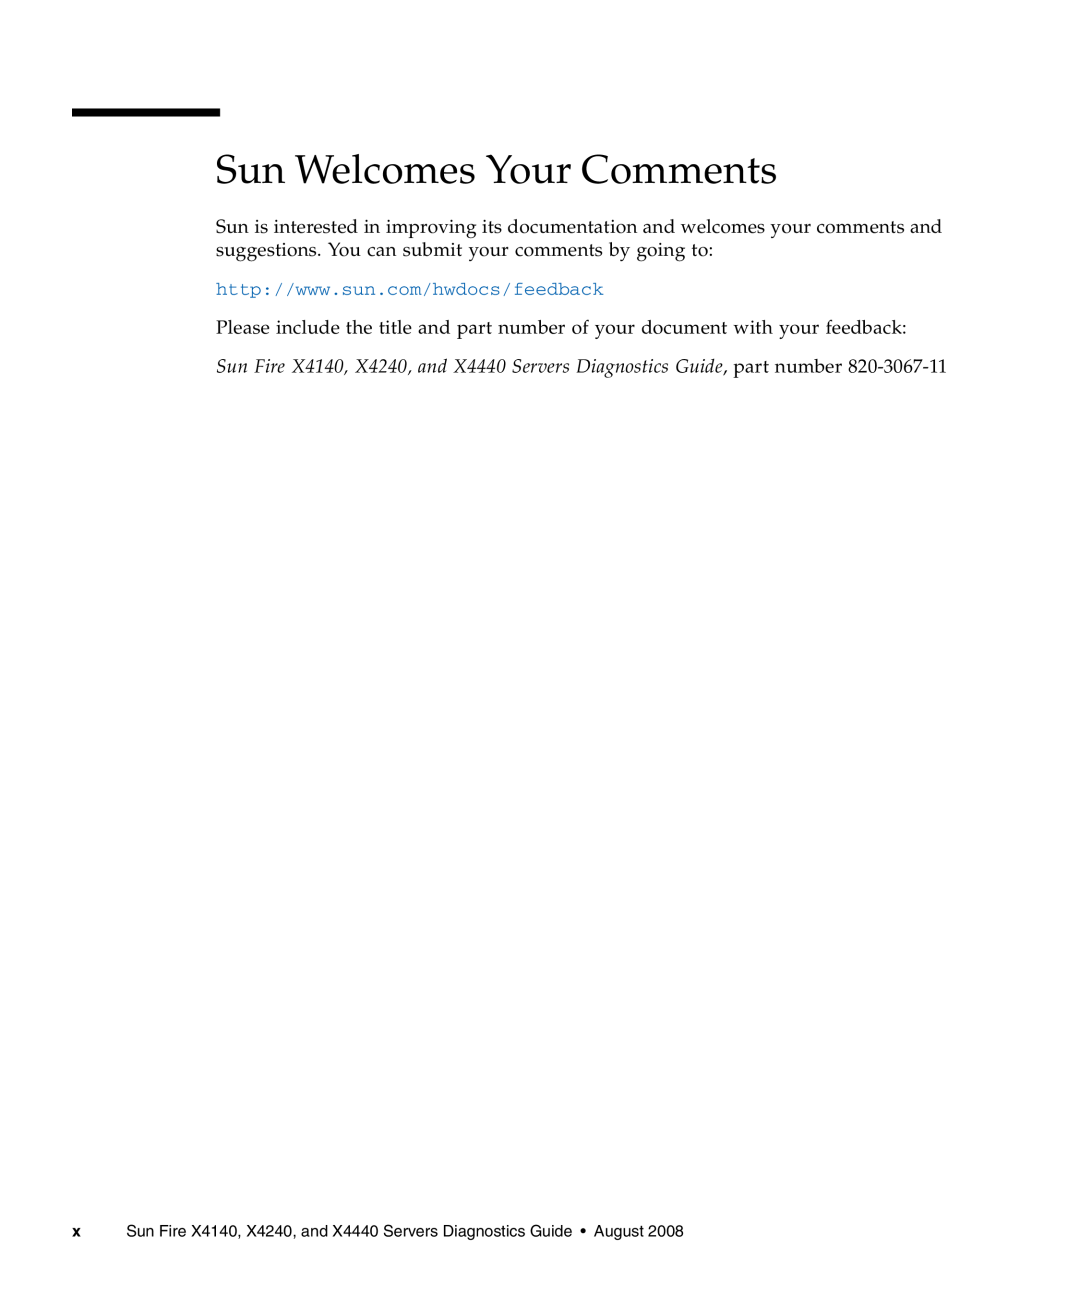 Sun Microsystems manual Sun Welcomes Your Comments, x Sun Fire X4140, X4240, and X4440 Servers Diagnostics Guide August 